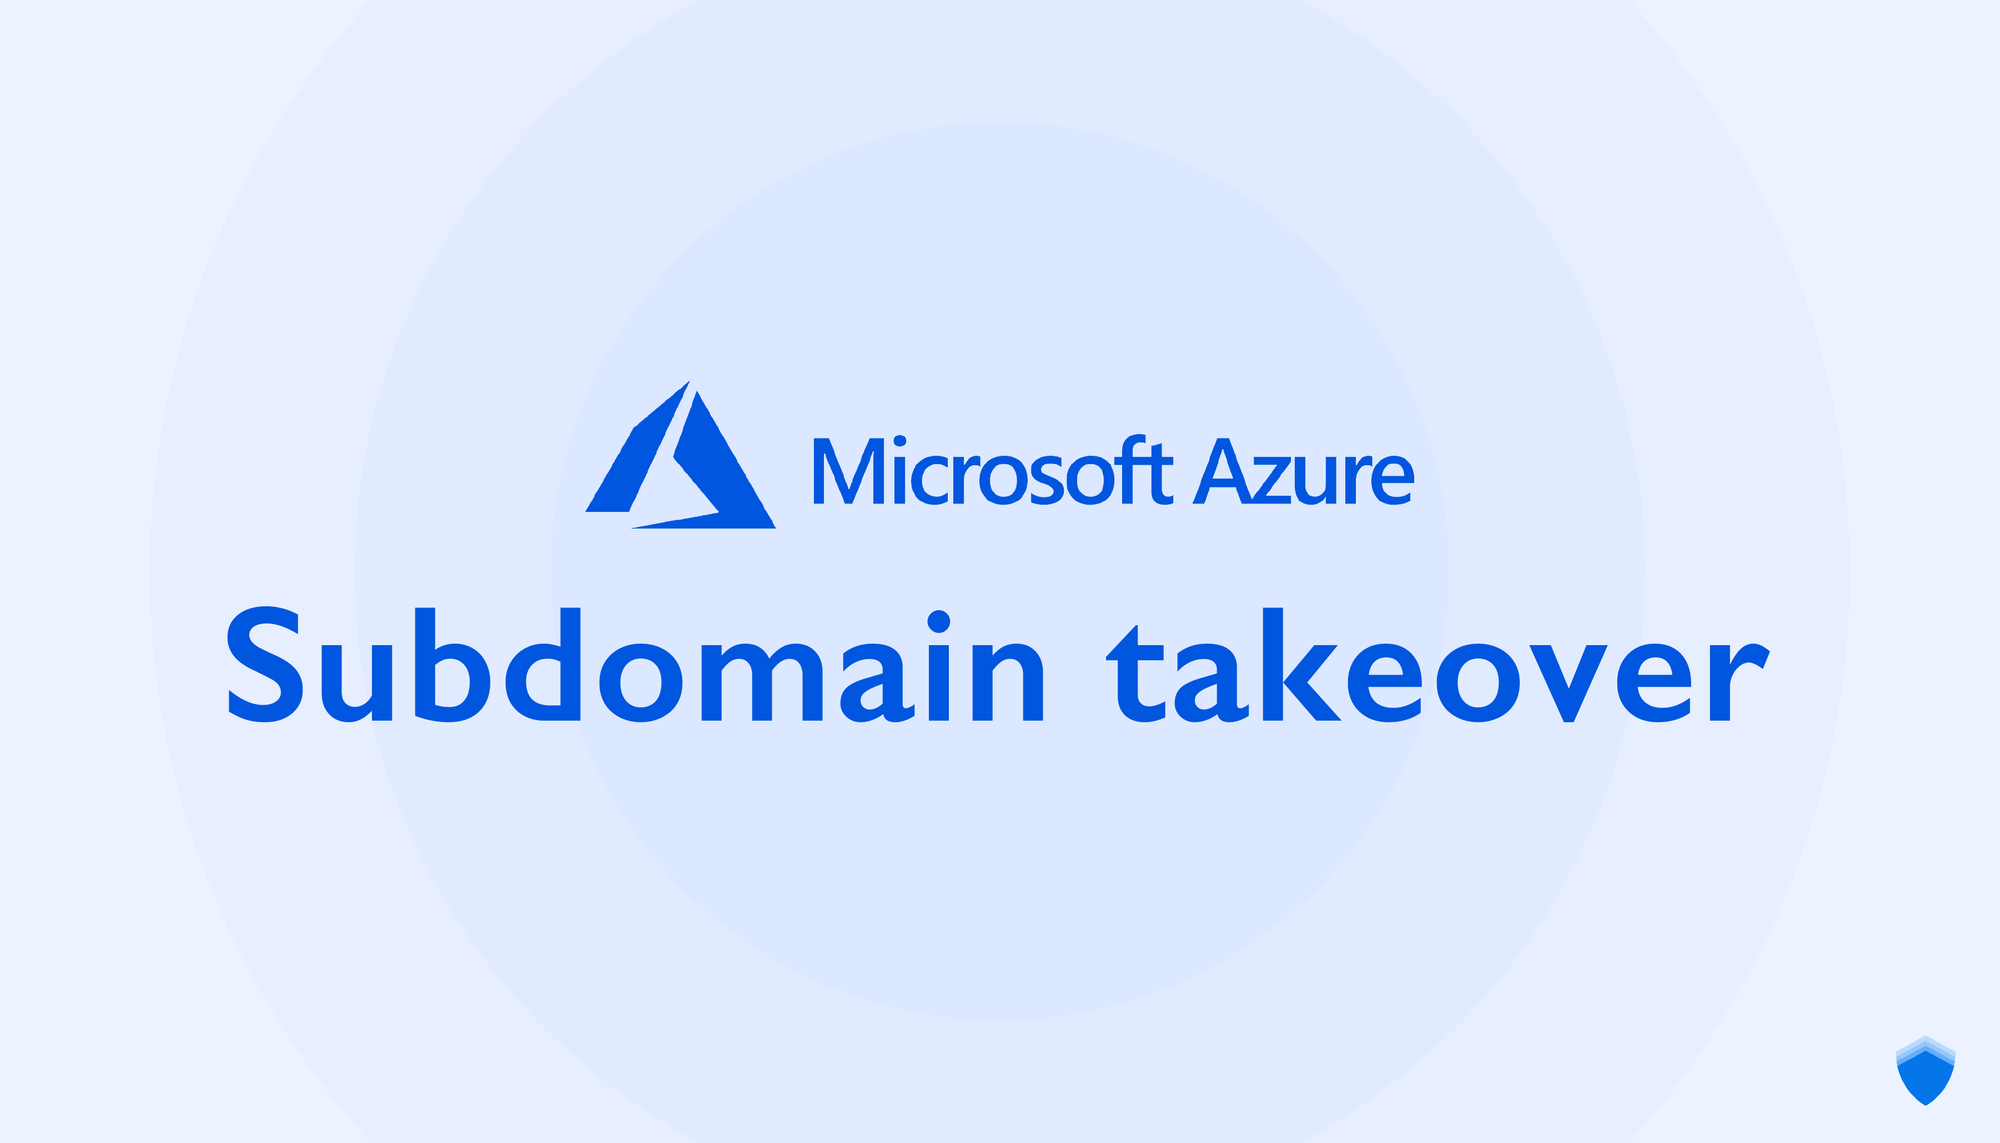 Subdomain takeover - Chapter two: Azure Services